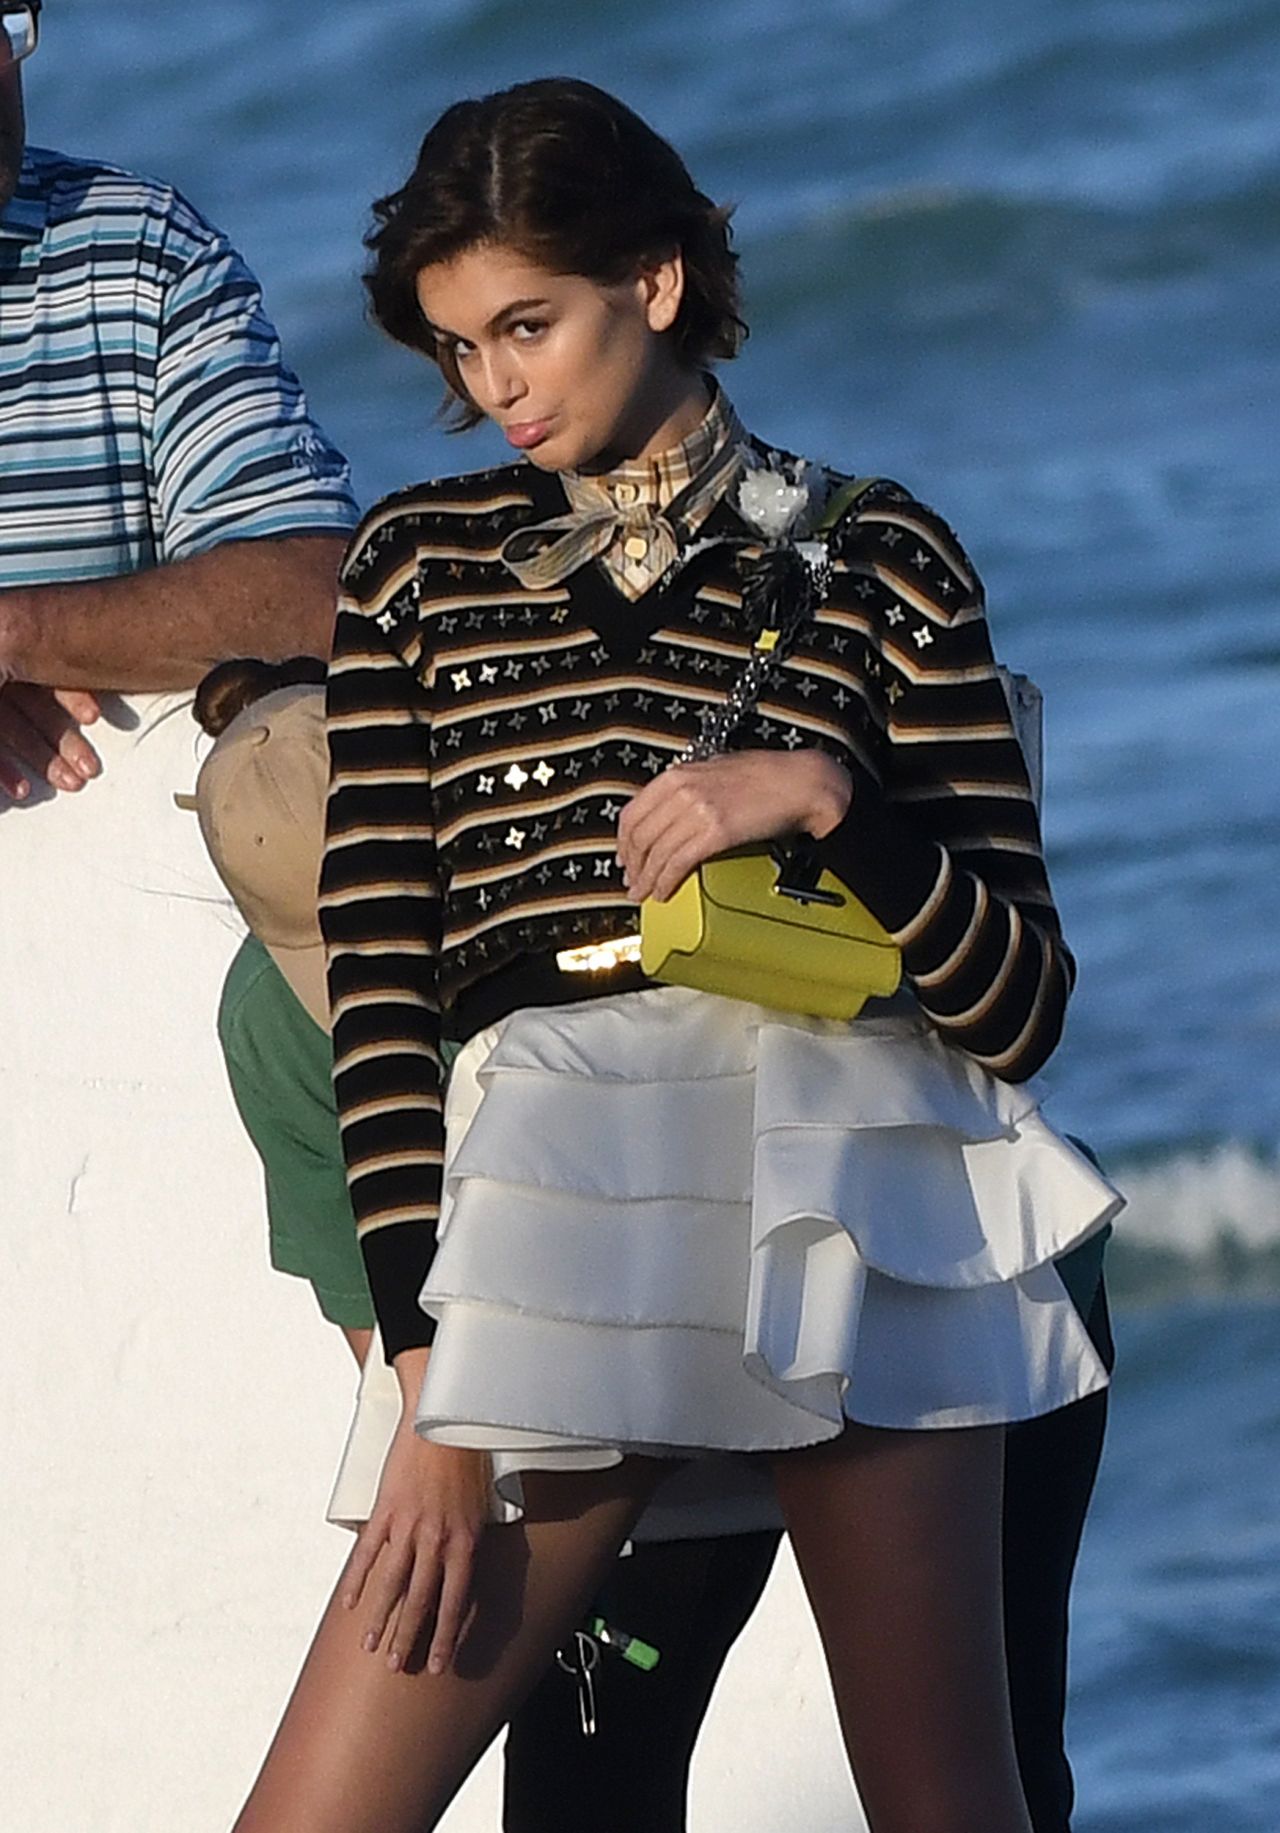 Kaia Gerber Shooting in Miami January 13, 2020 – Star Style